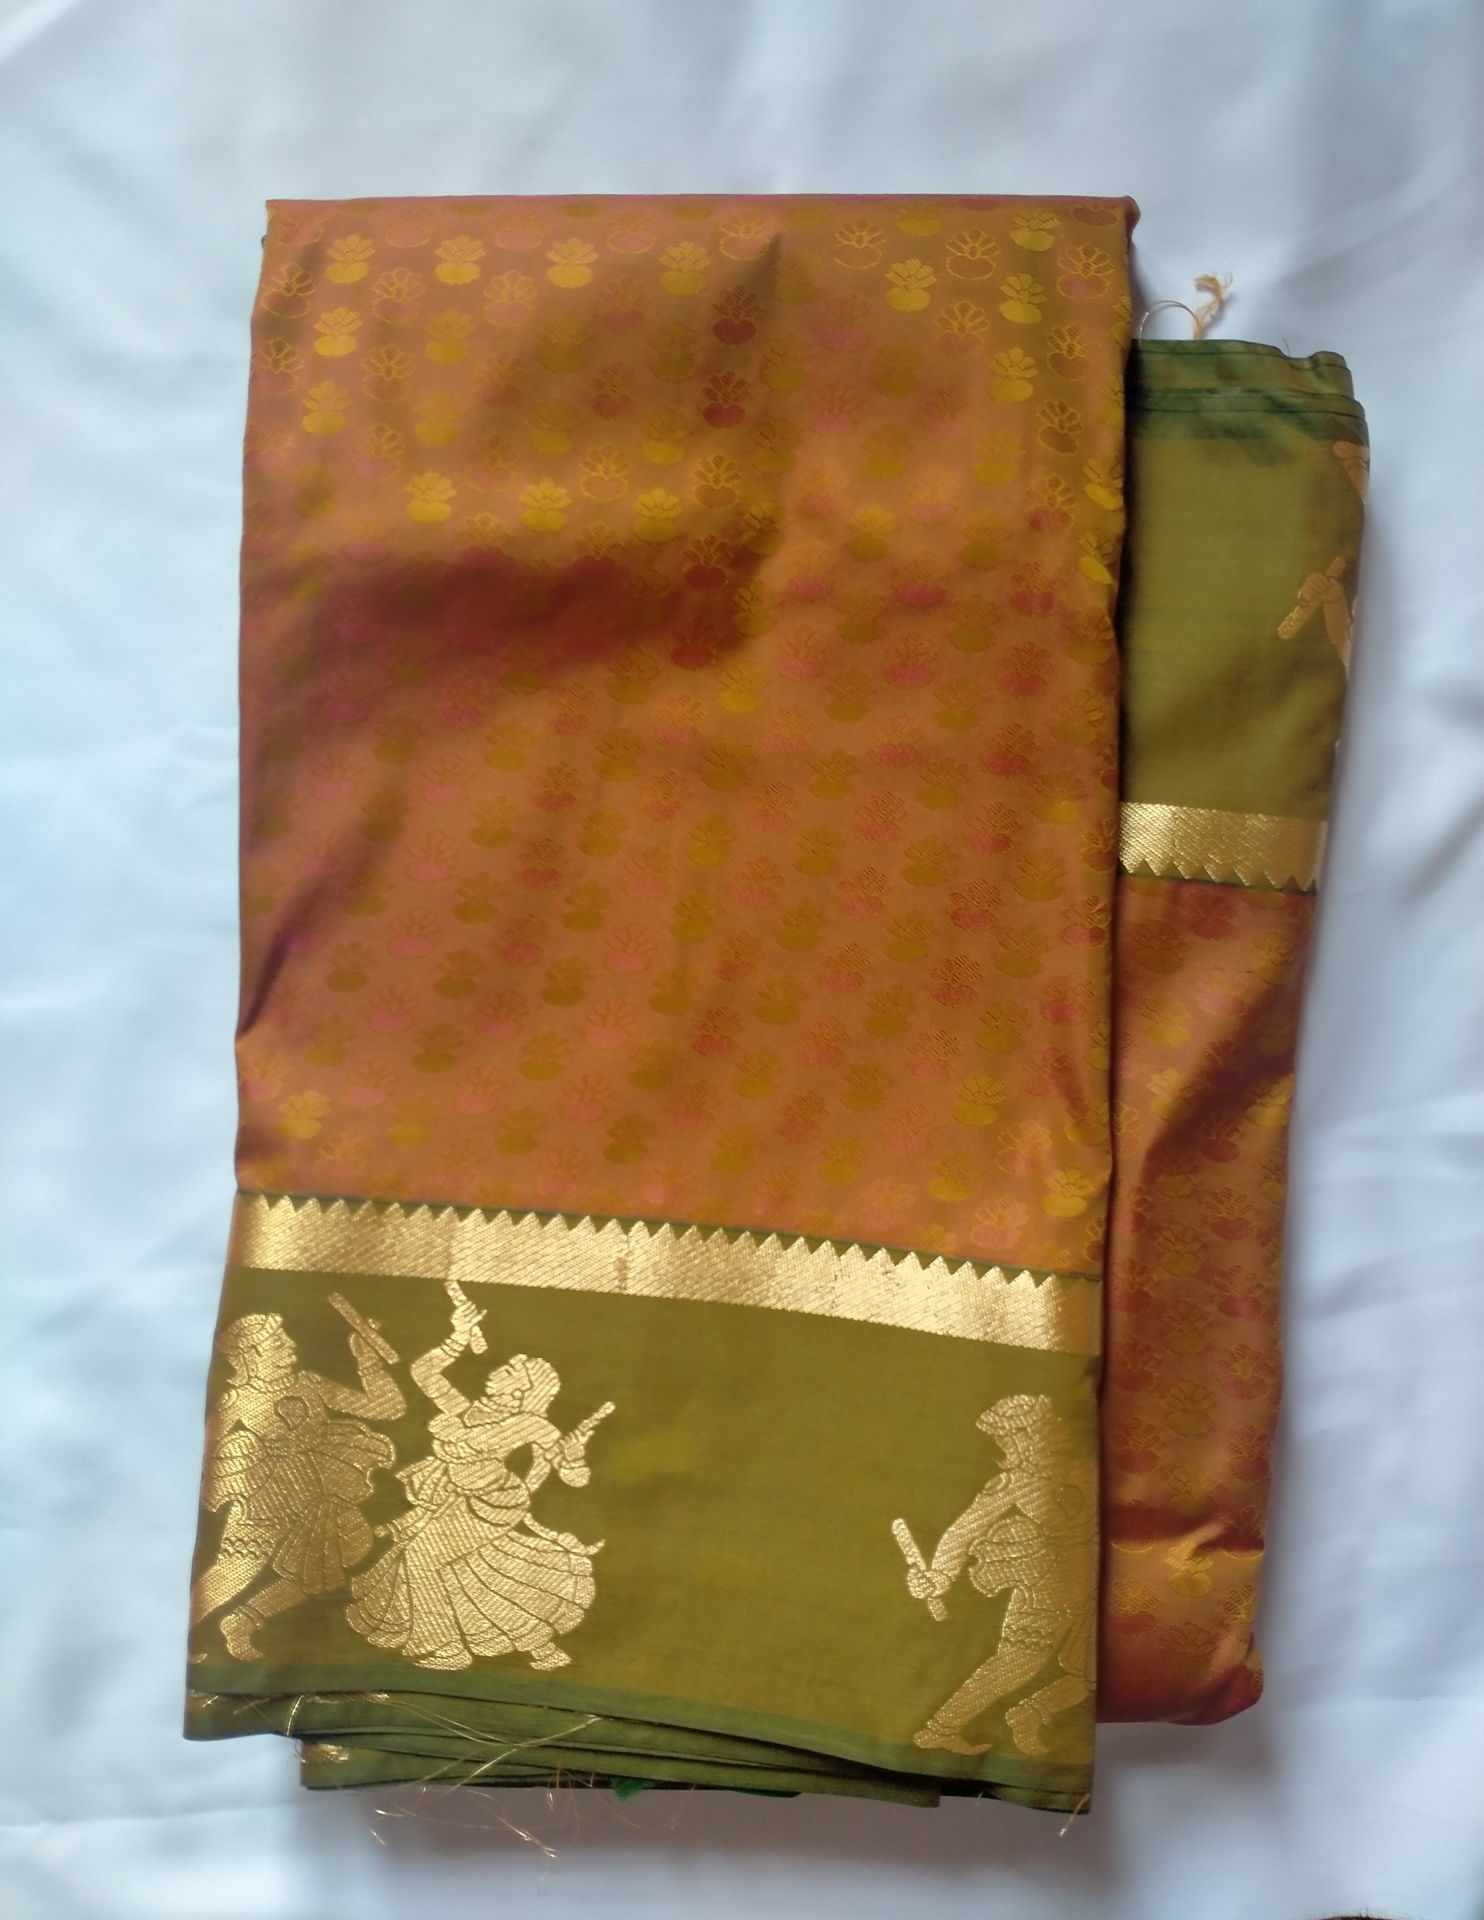 Kanchipuram Silk Sarees Available In 7 Colors Wecomart Buy Authentic Indian Handicrafts Online 